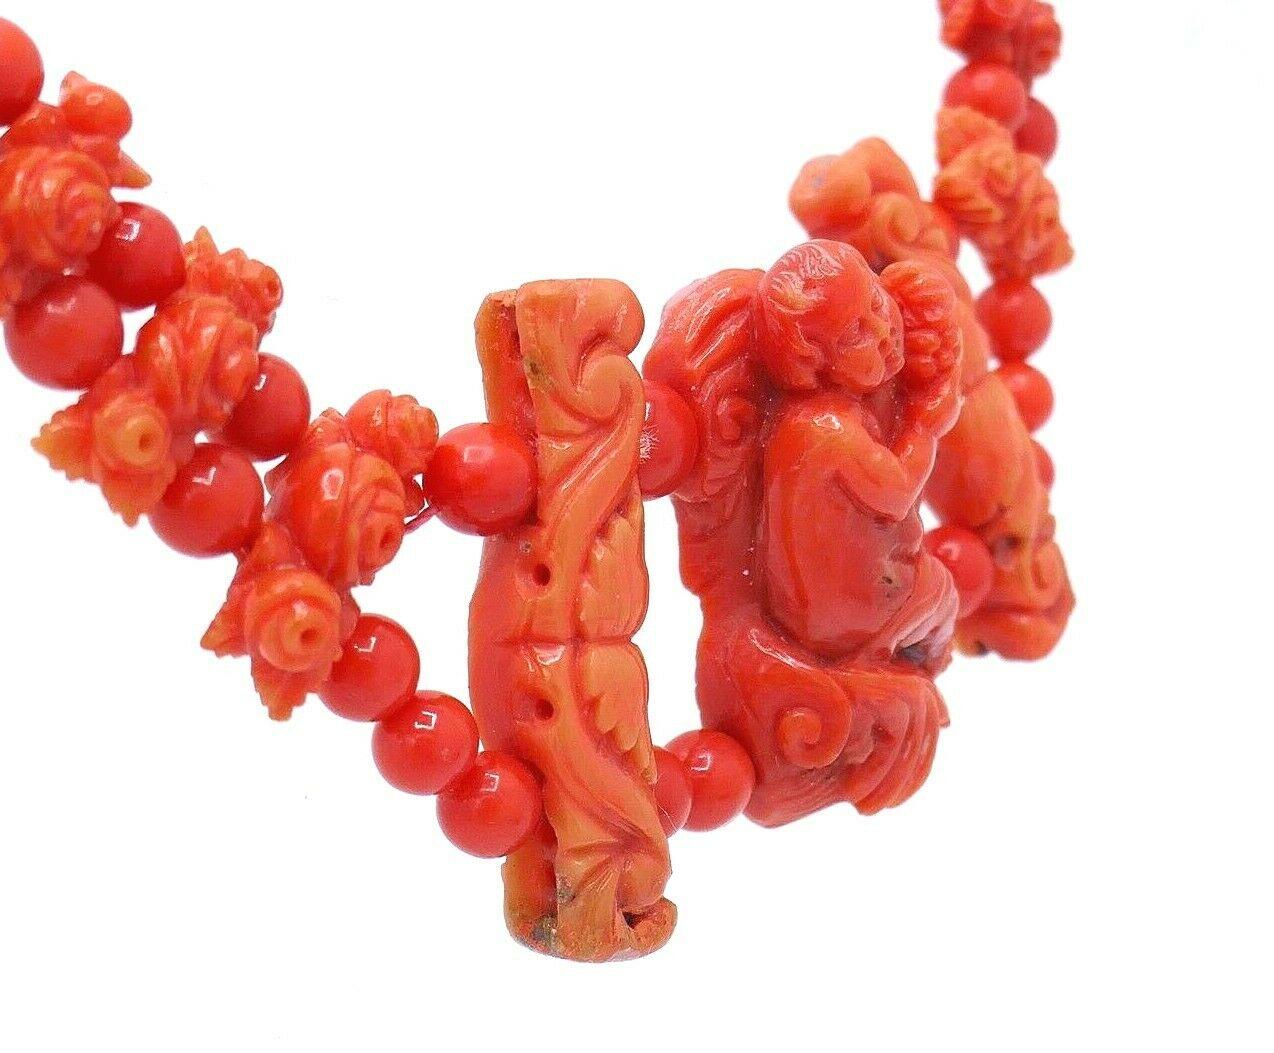 Unique carved coral necklace (circa 1900). The central part is a carved figure of a boy holding a grape. On the sides there are floral elements and the rest are beads. Featuring 14k (stamped) yellow gold clasp.  
Measurements: 16